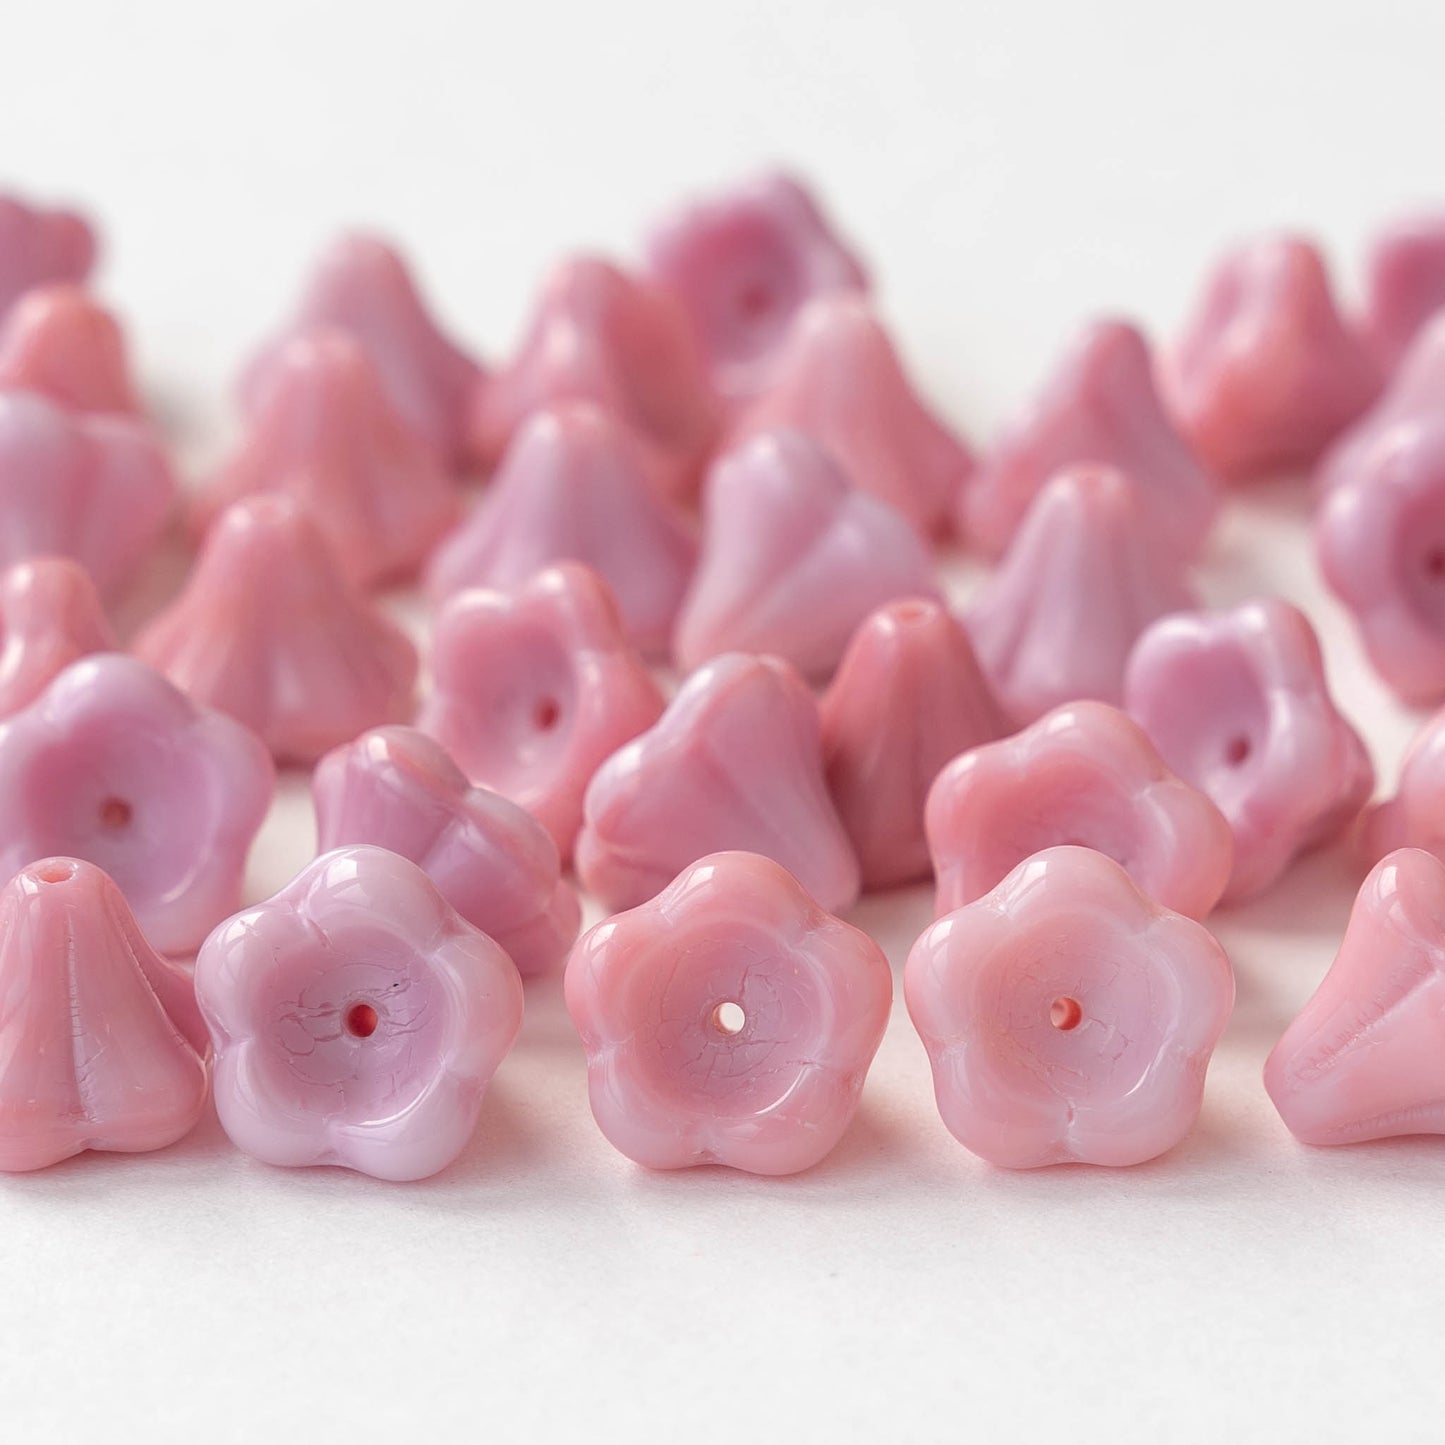 10x12mm Trumpet Flower Beads - Opaque Pink Rose - 10 or 30